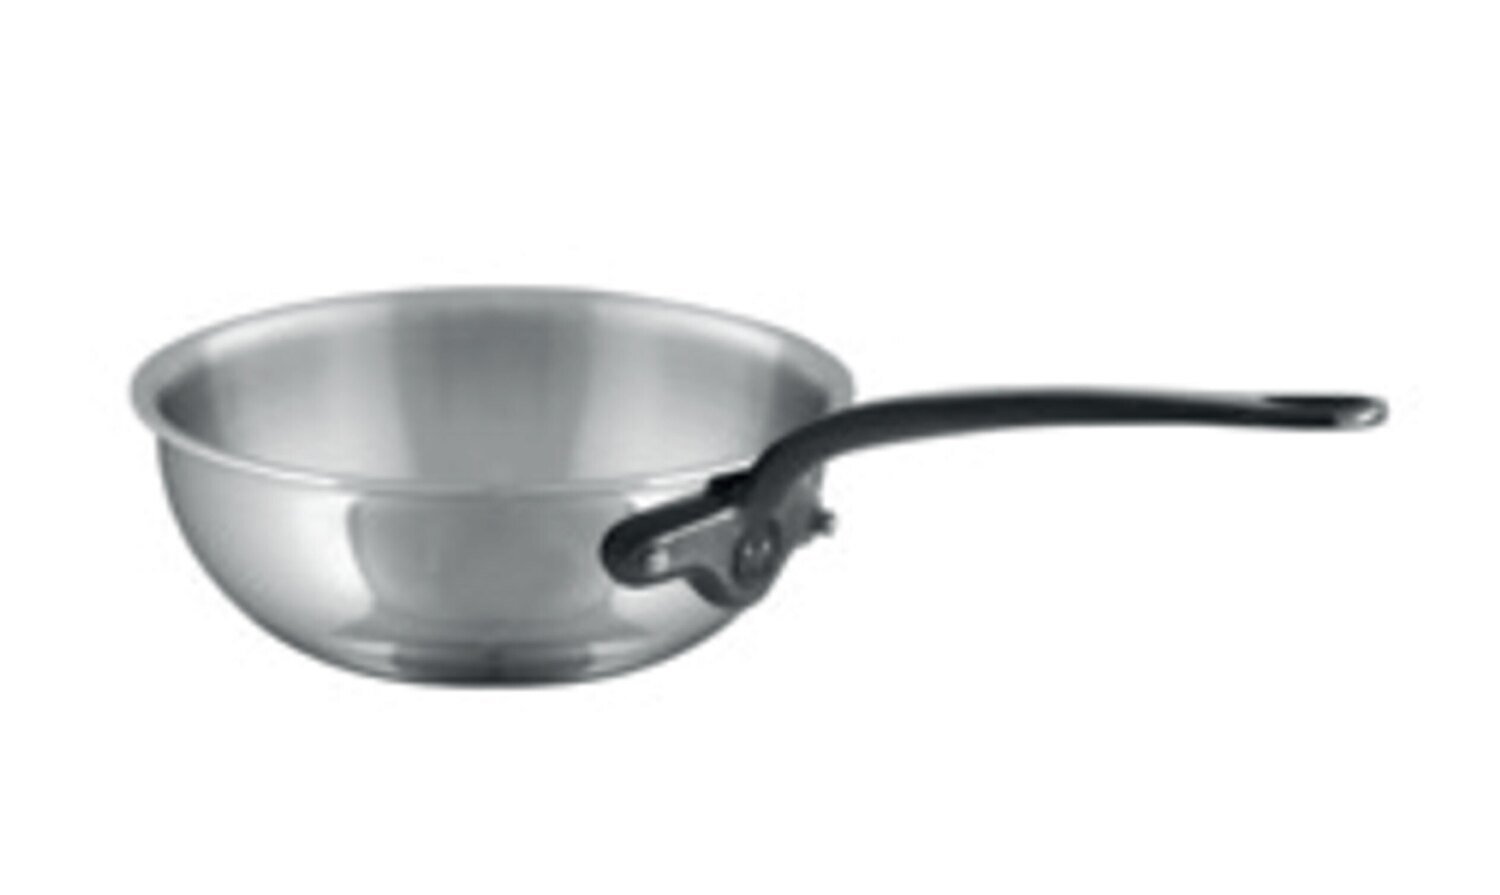 Mauviel M'Cook Curved Splayed Saute Pan 24cm 561224